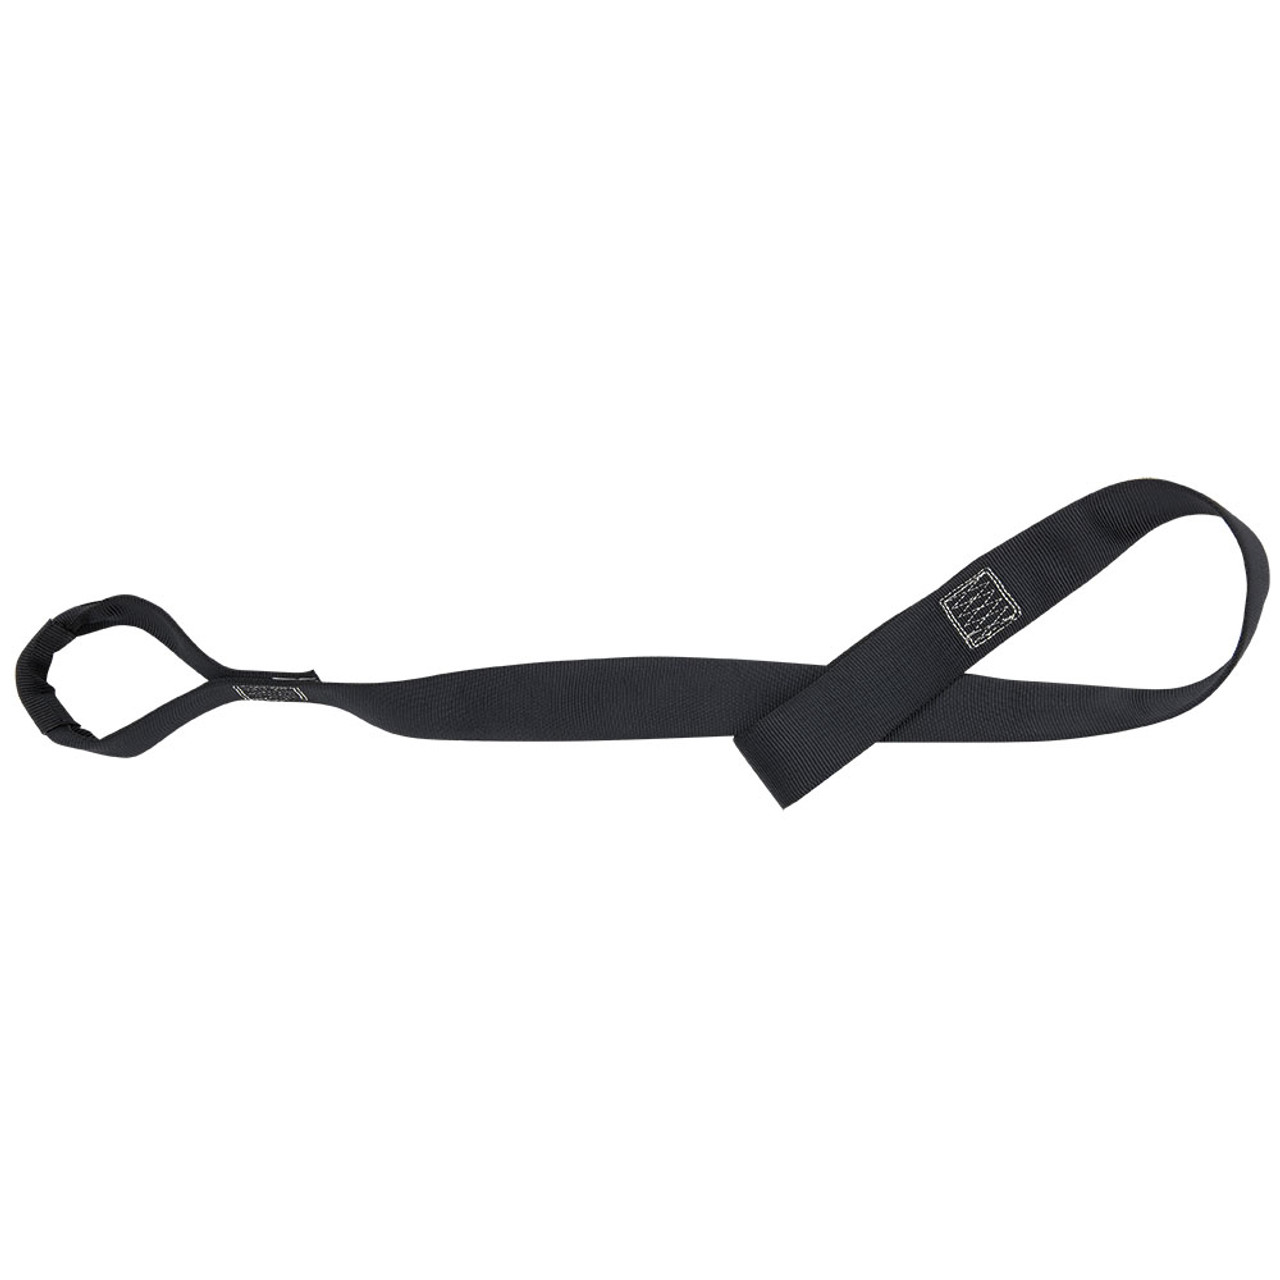 ANCHOR SLING 3FT CSA APPROVED